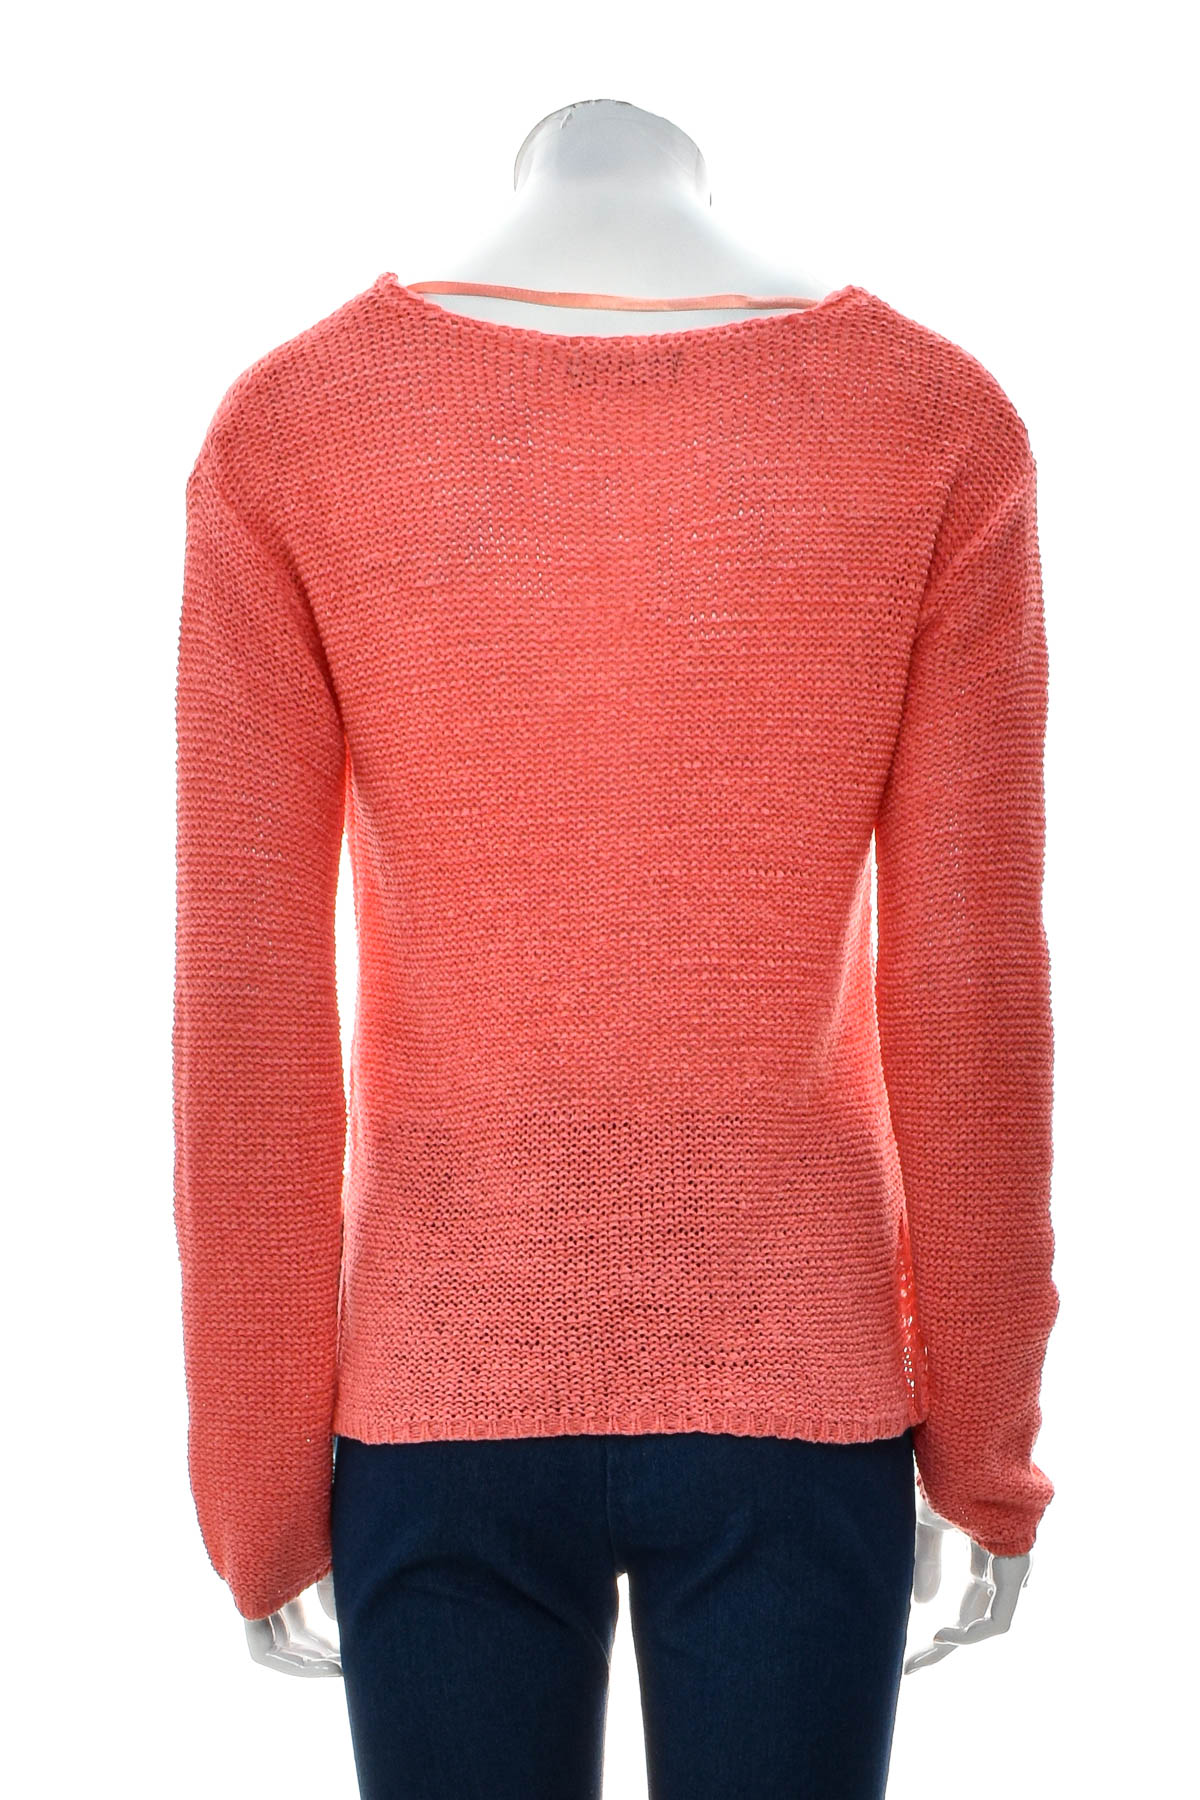 Women's sweater - Colours of the world - 1